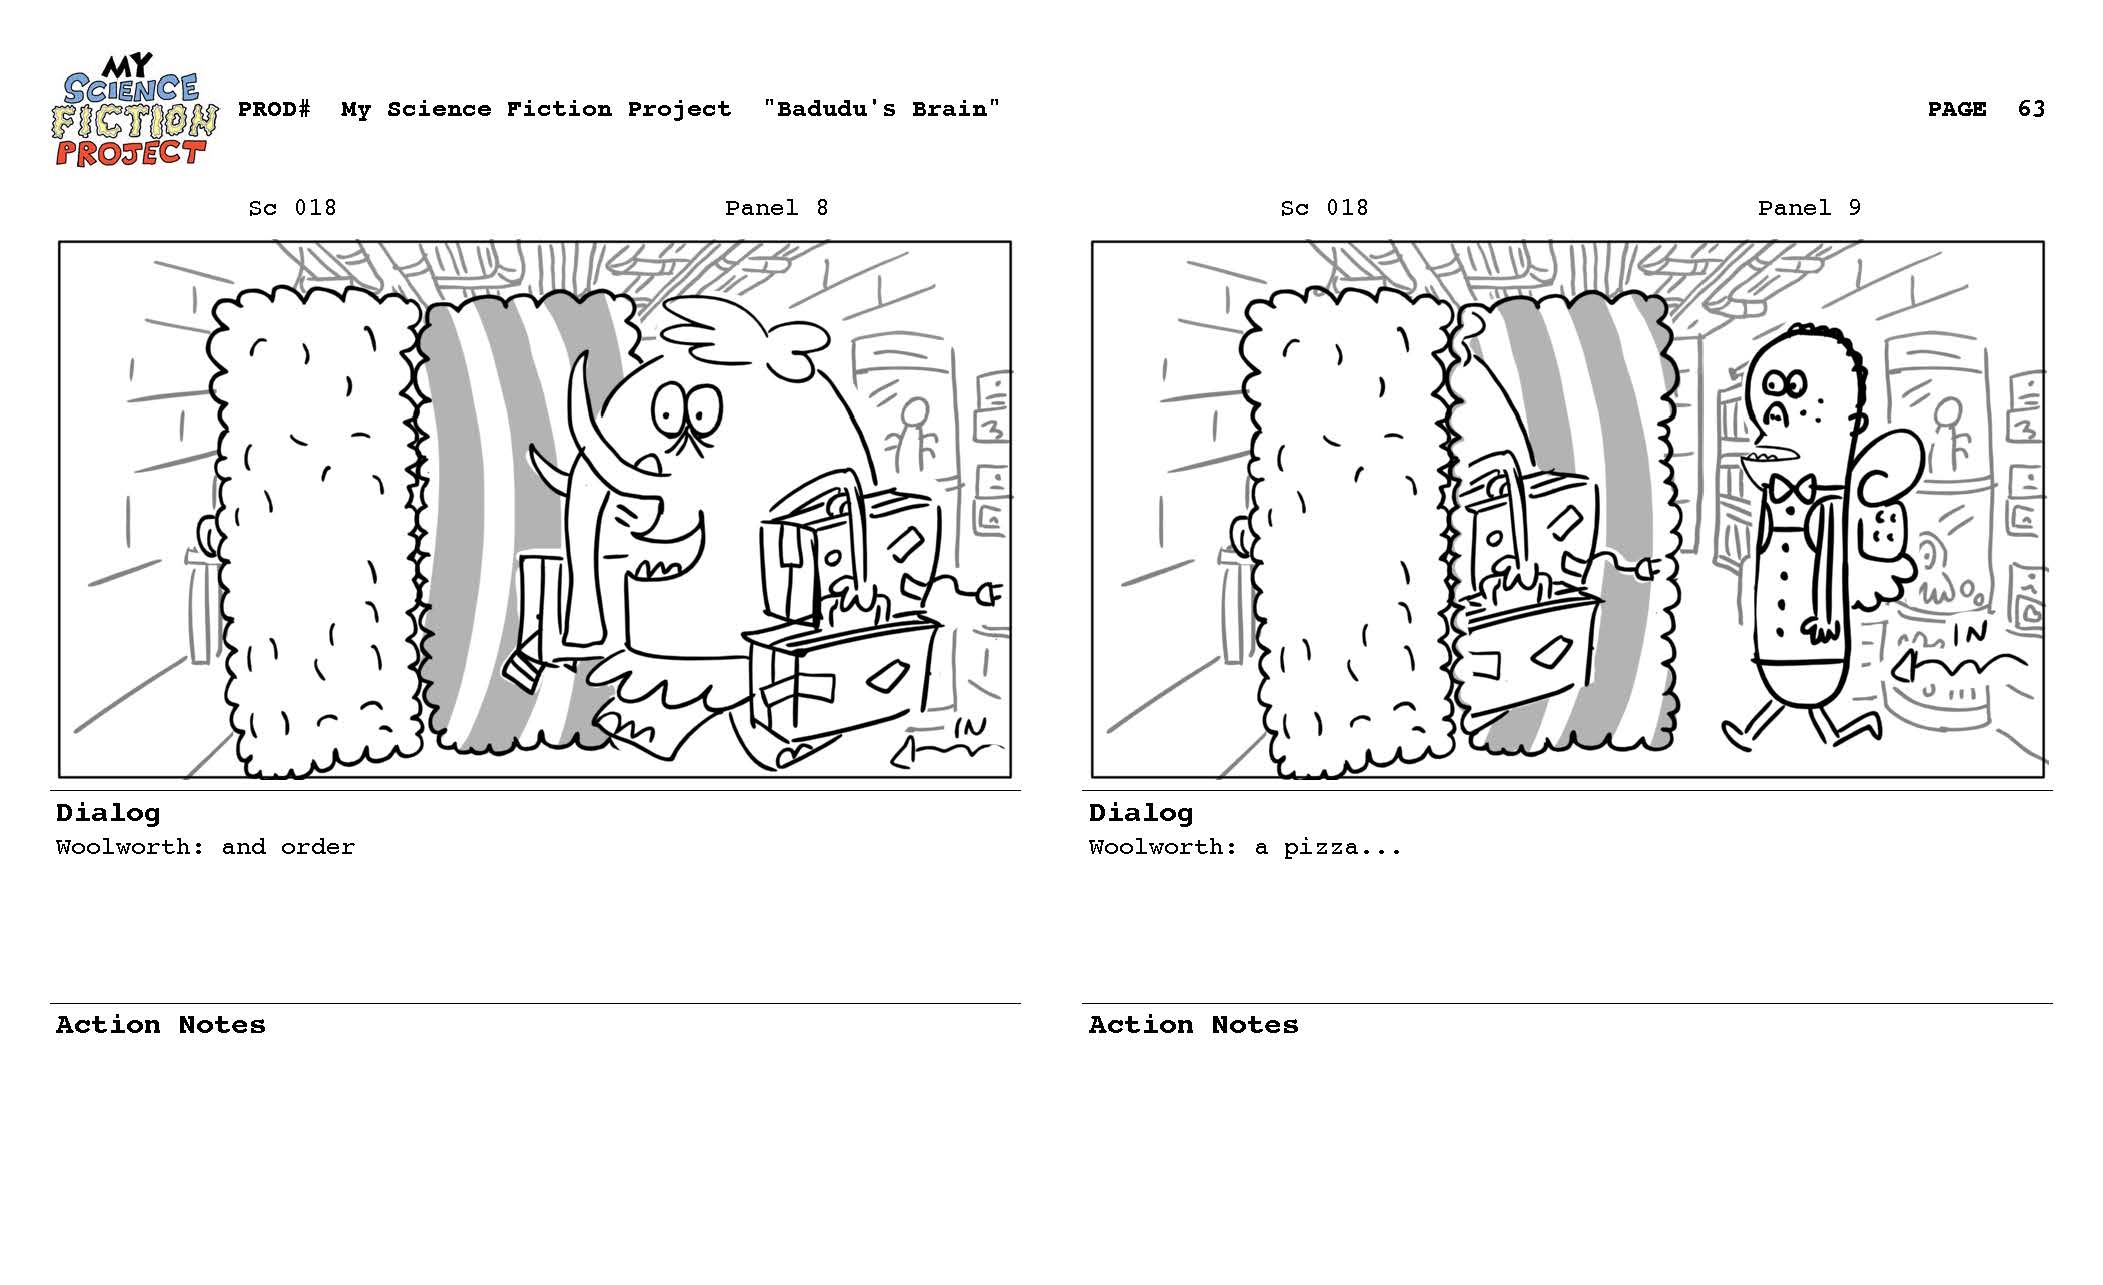 My_Science_Fiction_Project_SB_083112_reduced_Page_063.jpg